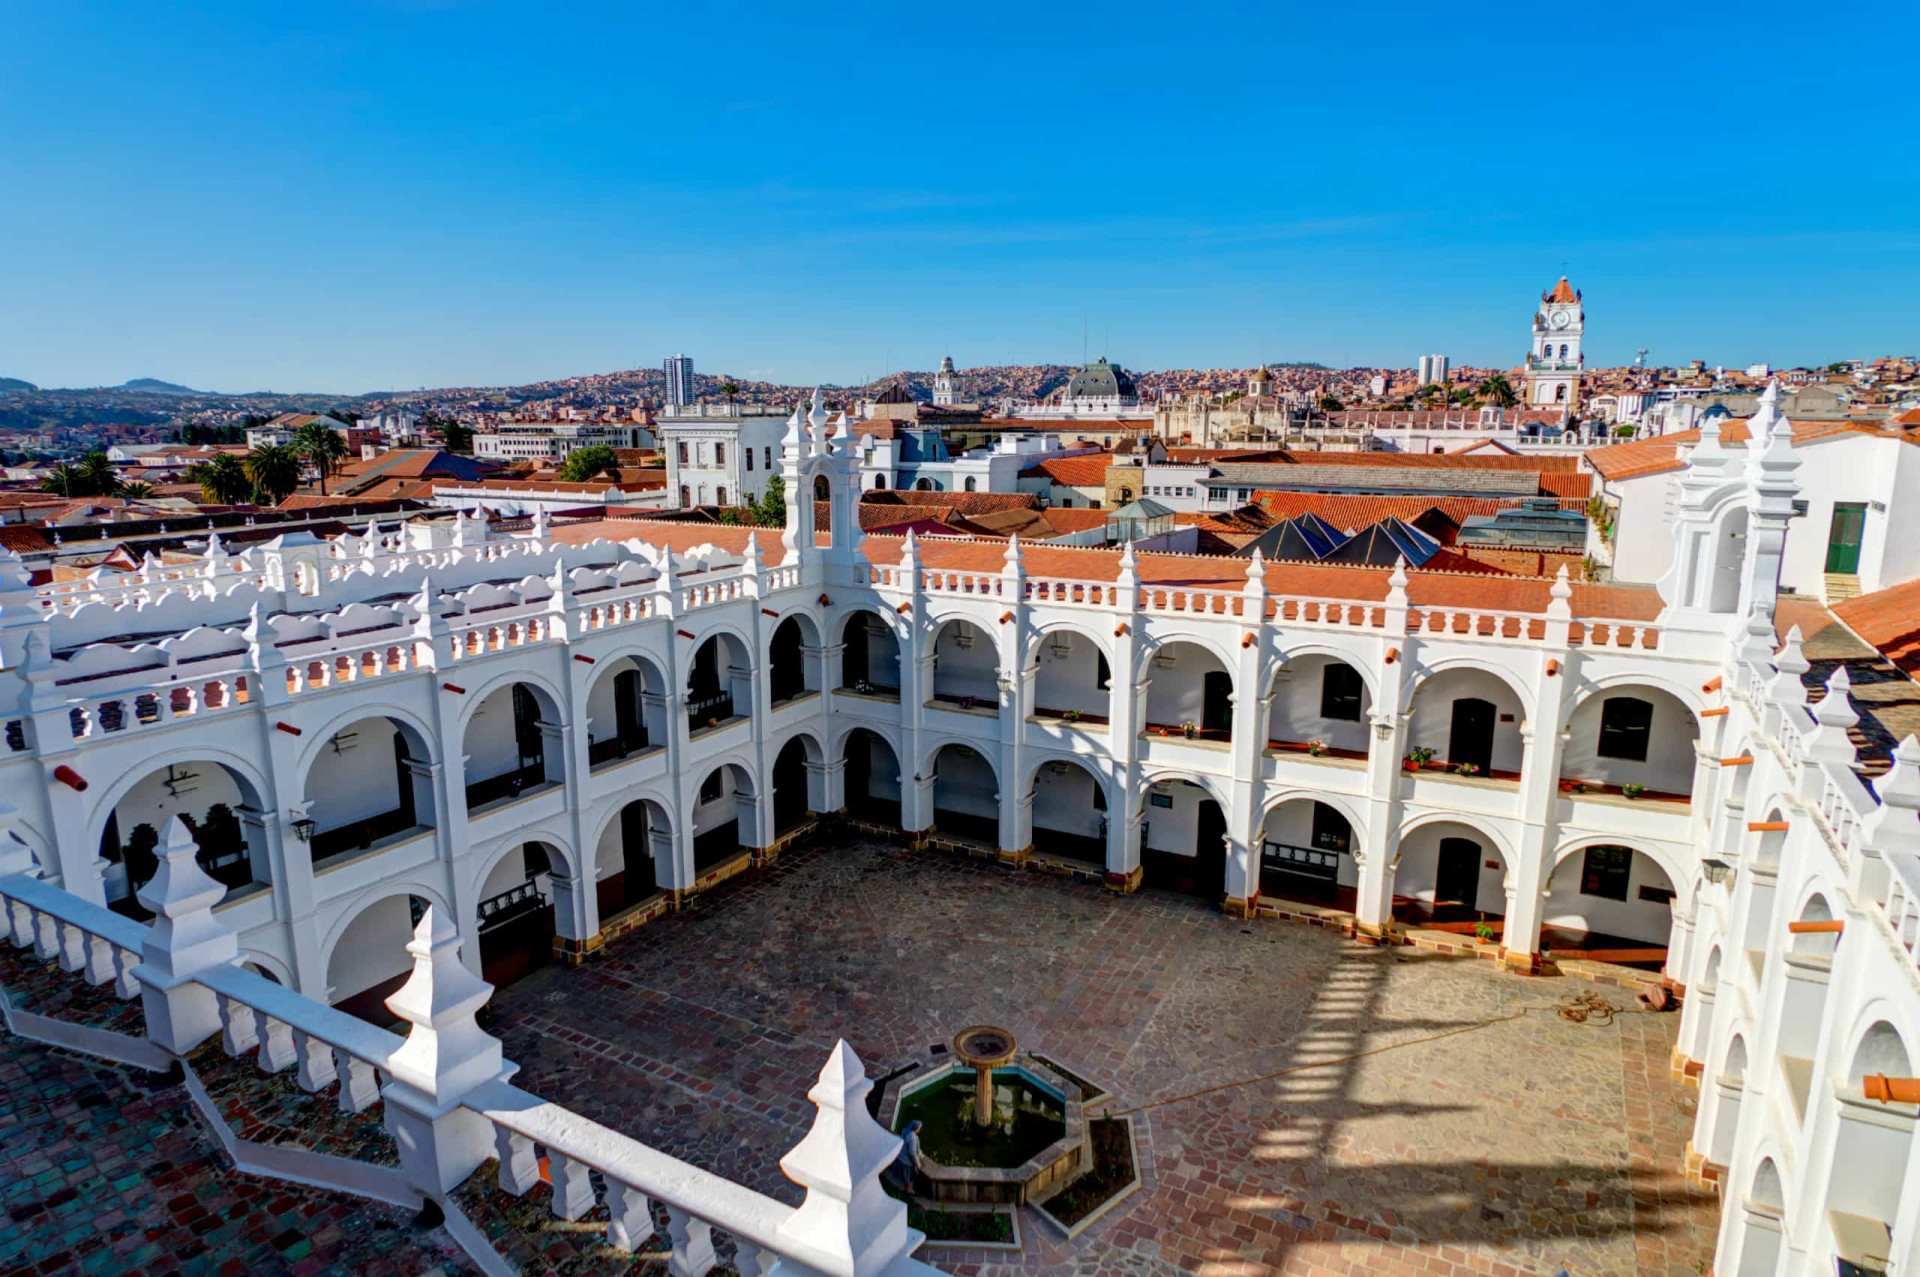 Admittedly, the city of Sucre is hardly off the beaten track, given that it's the sixth most-populated city in the country. But it's easy to lose yourself among the beautiful 16th-century colonial buildings that make up Sucre's UNESCO-protected historic core. Don't miss the outstanding Convento de San Felipe Neri (pictured).